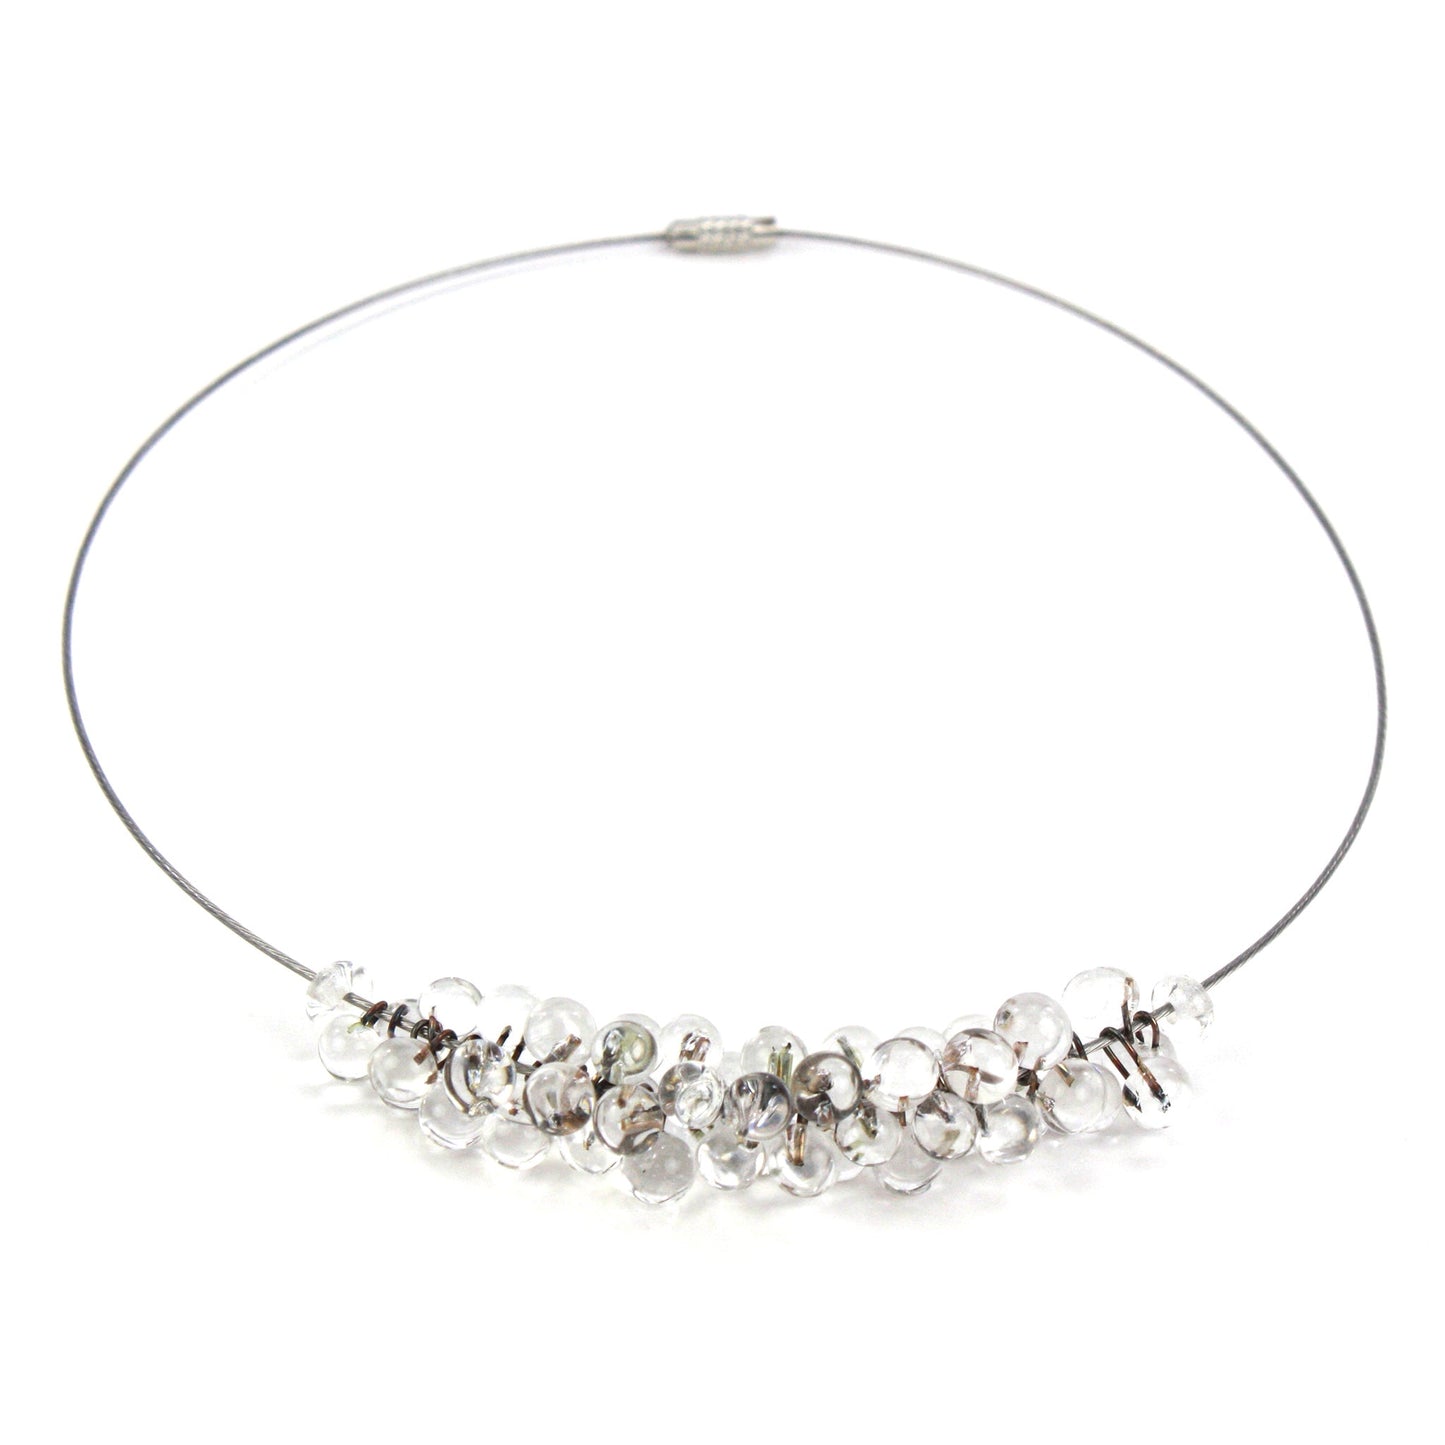 Petite Chroma Necklace in Clear